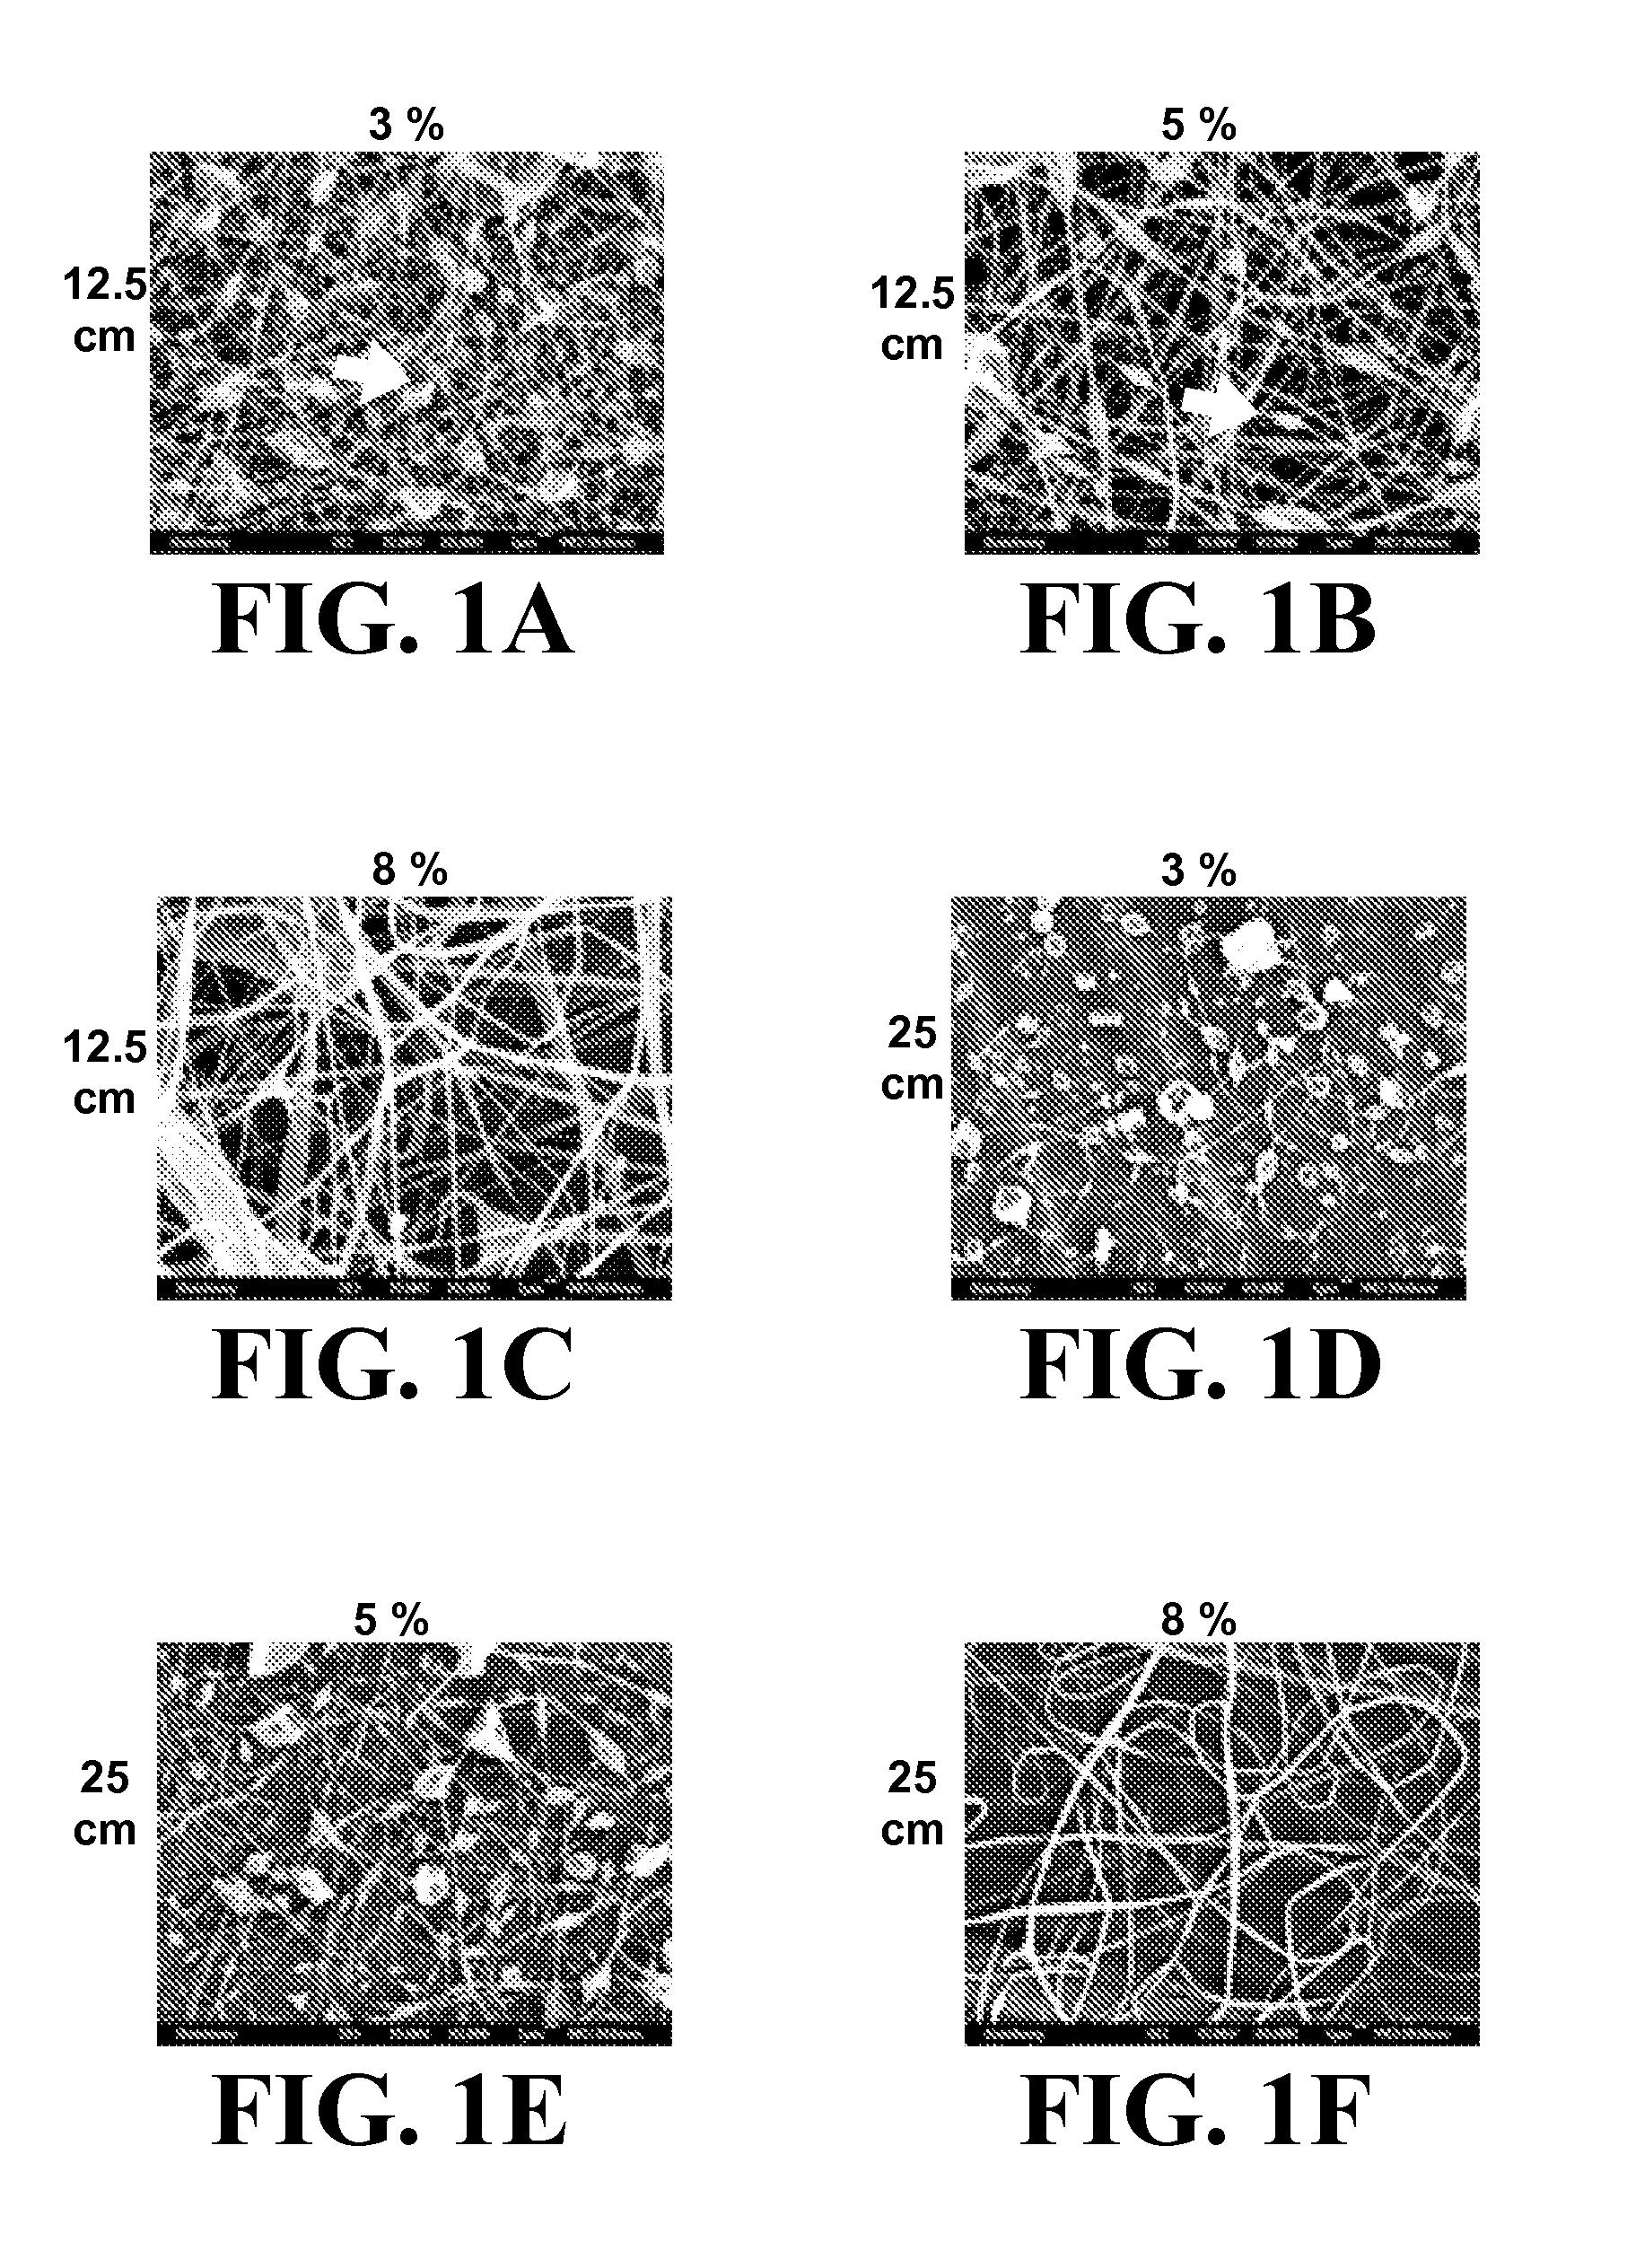 Compositions and Methods for Making and Using Laminin Nanofibers